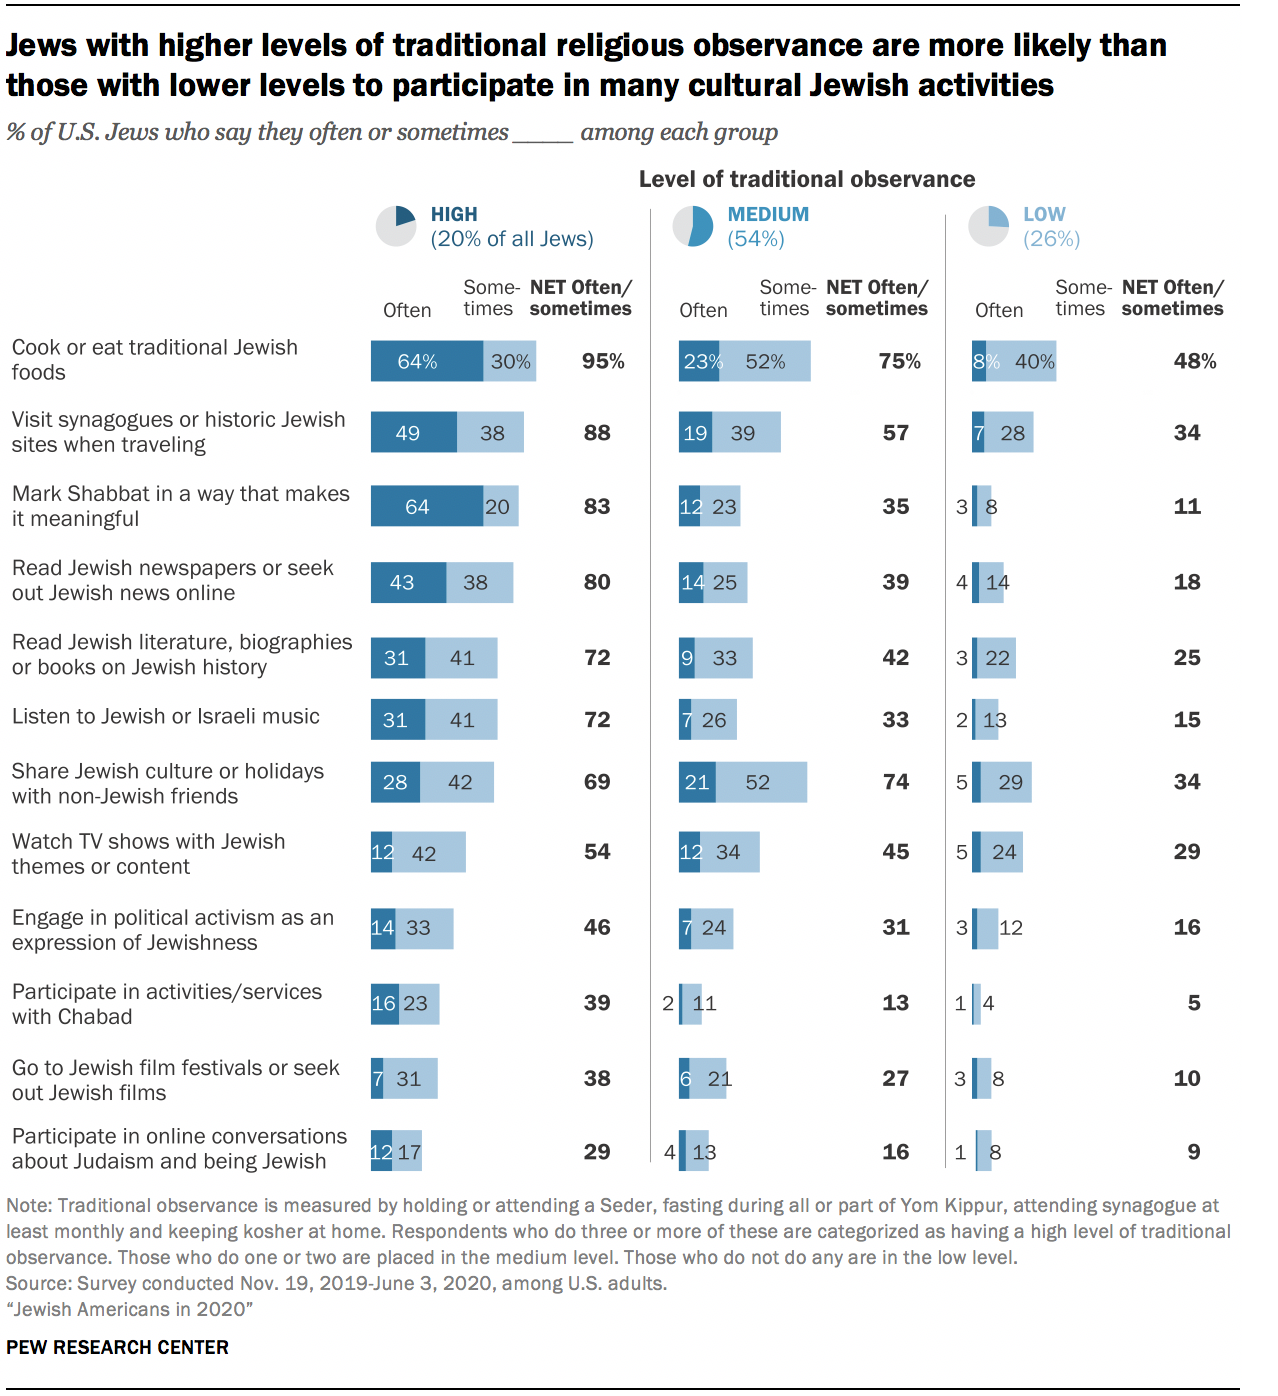 Jews with higher levels of traditional religious observance are more likely than those with lower levels to participate in many cultural Jewish activities